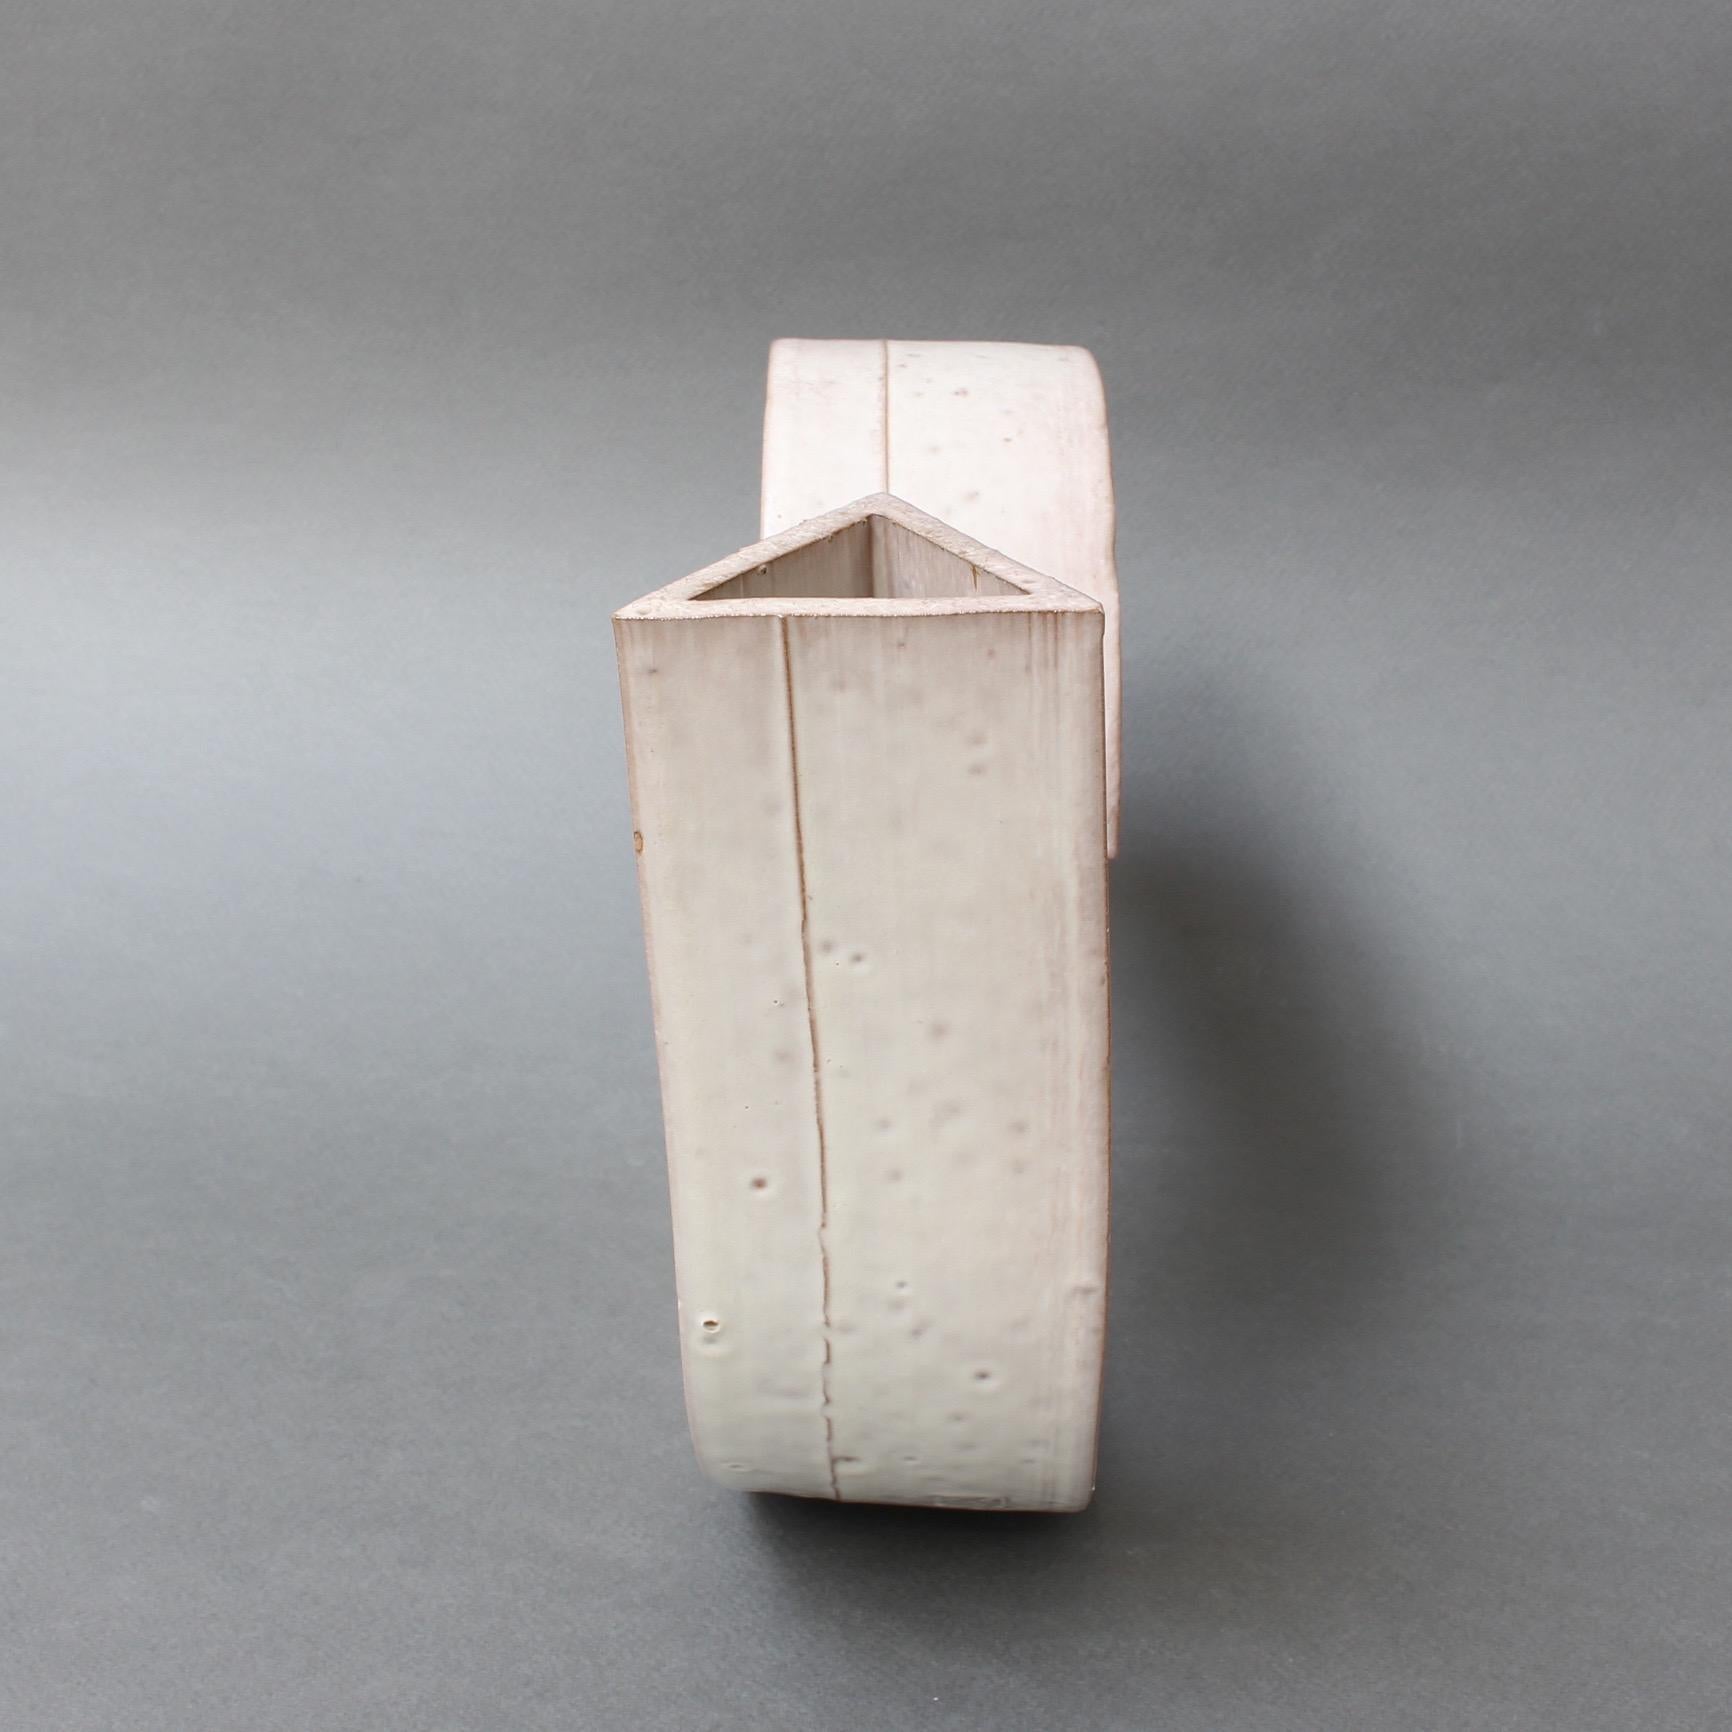 Glazed Industrial Style Ceramic Vase / Sculpture by Alessio Tasca, Nove, Italy, 1970s